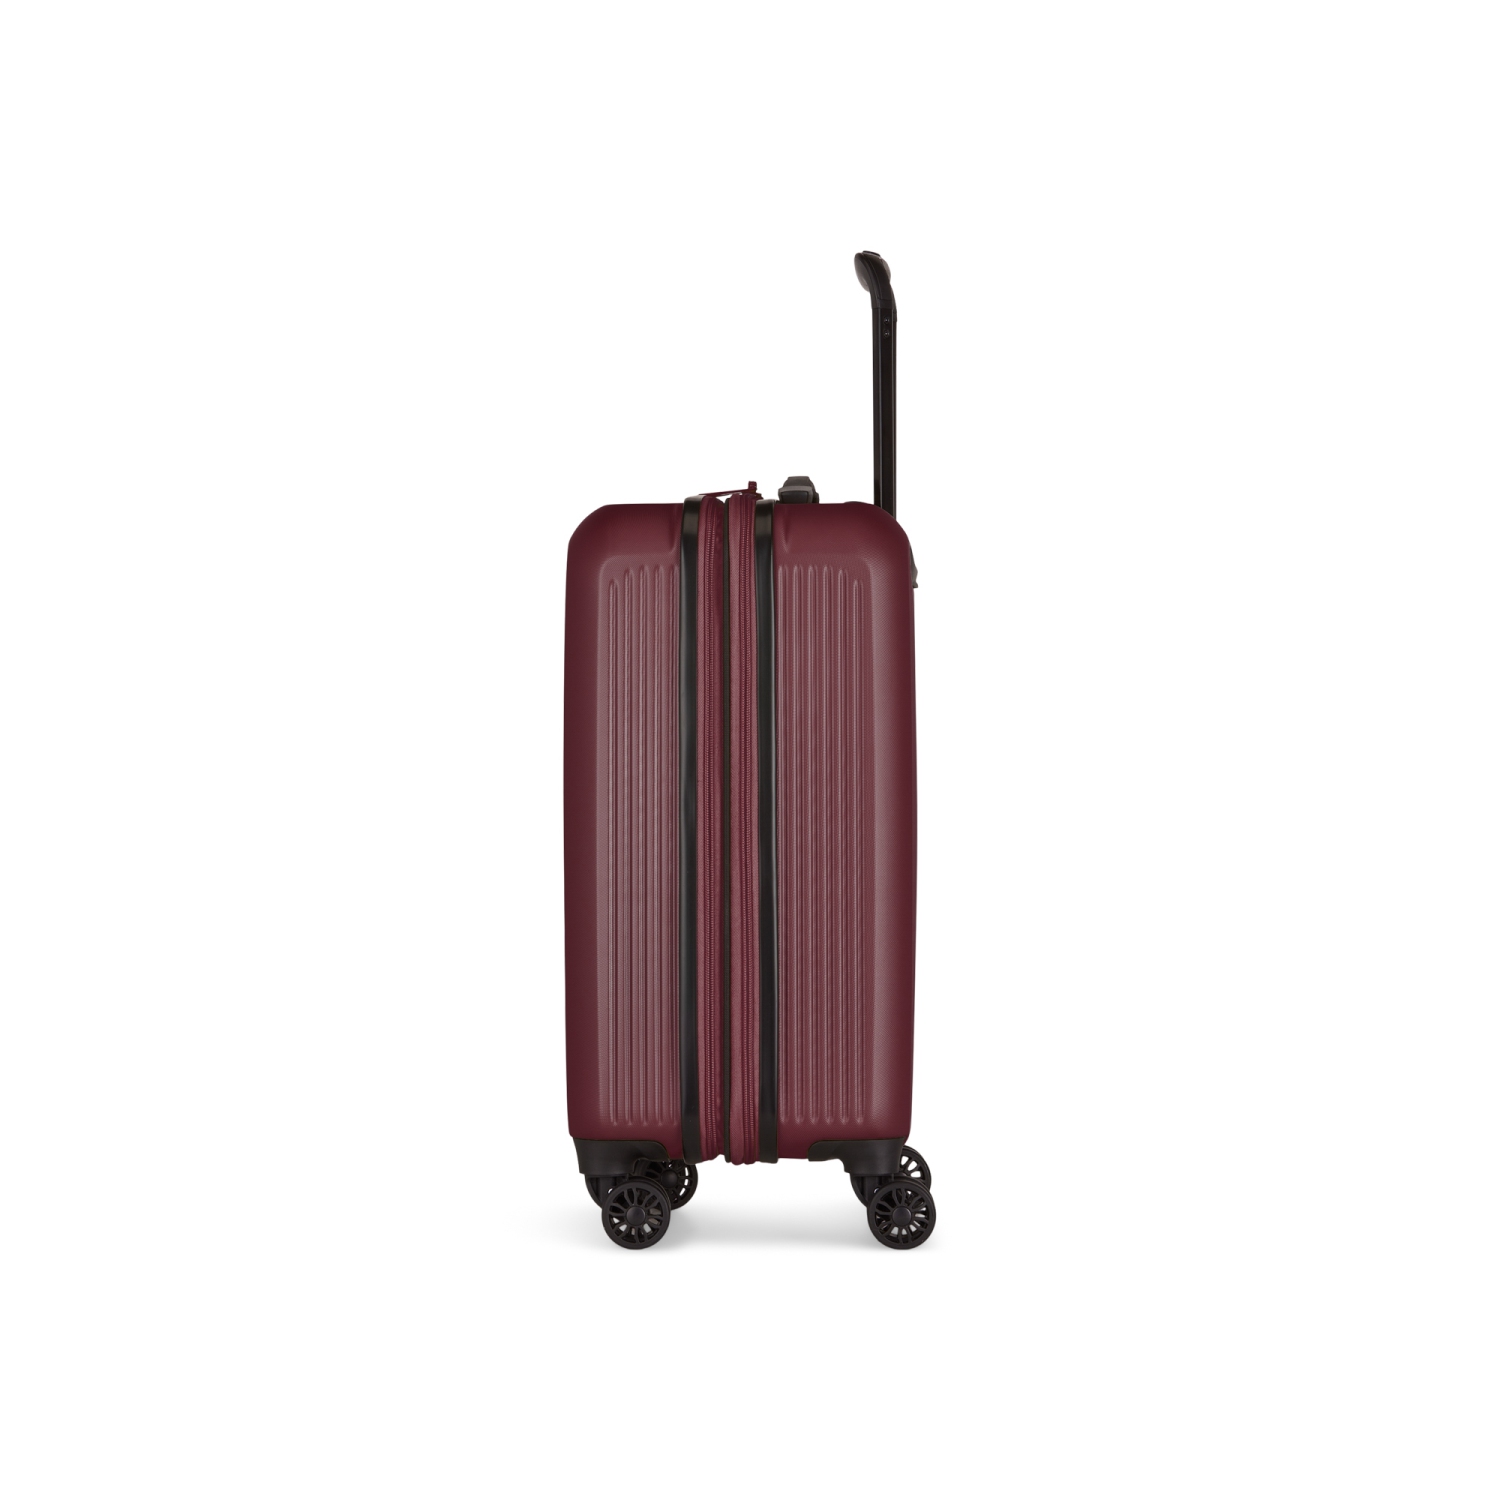 Reebok Action Carry-On Luggage